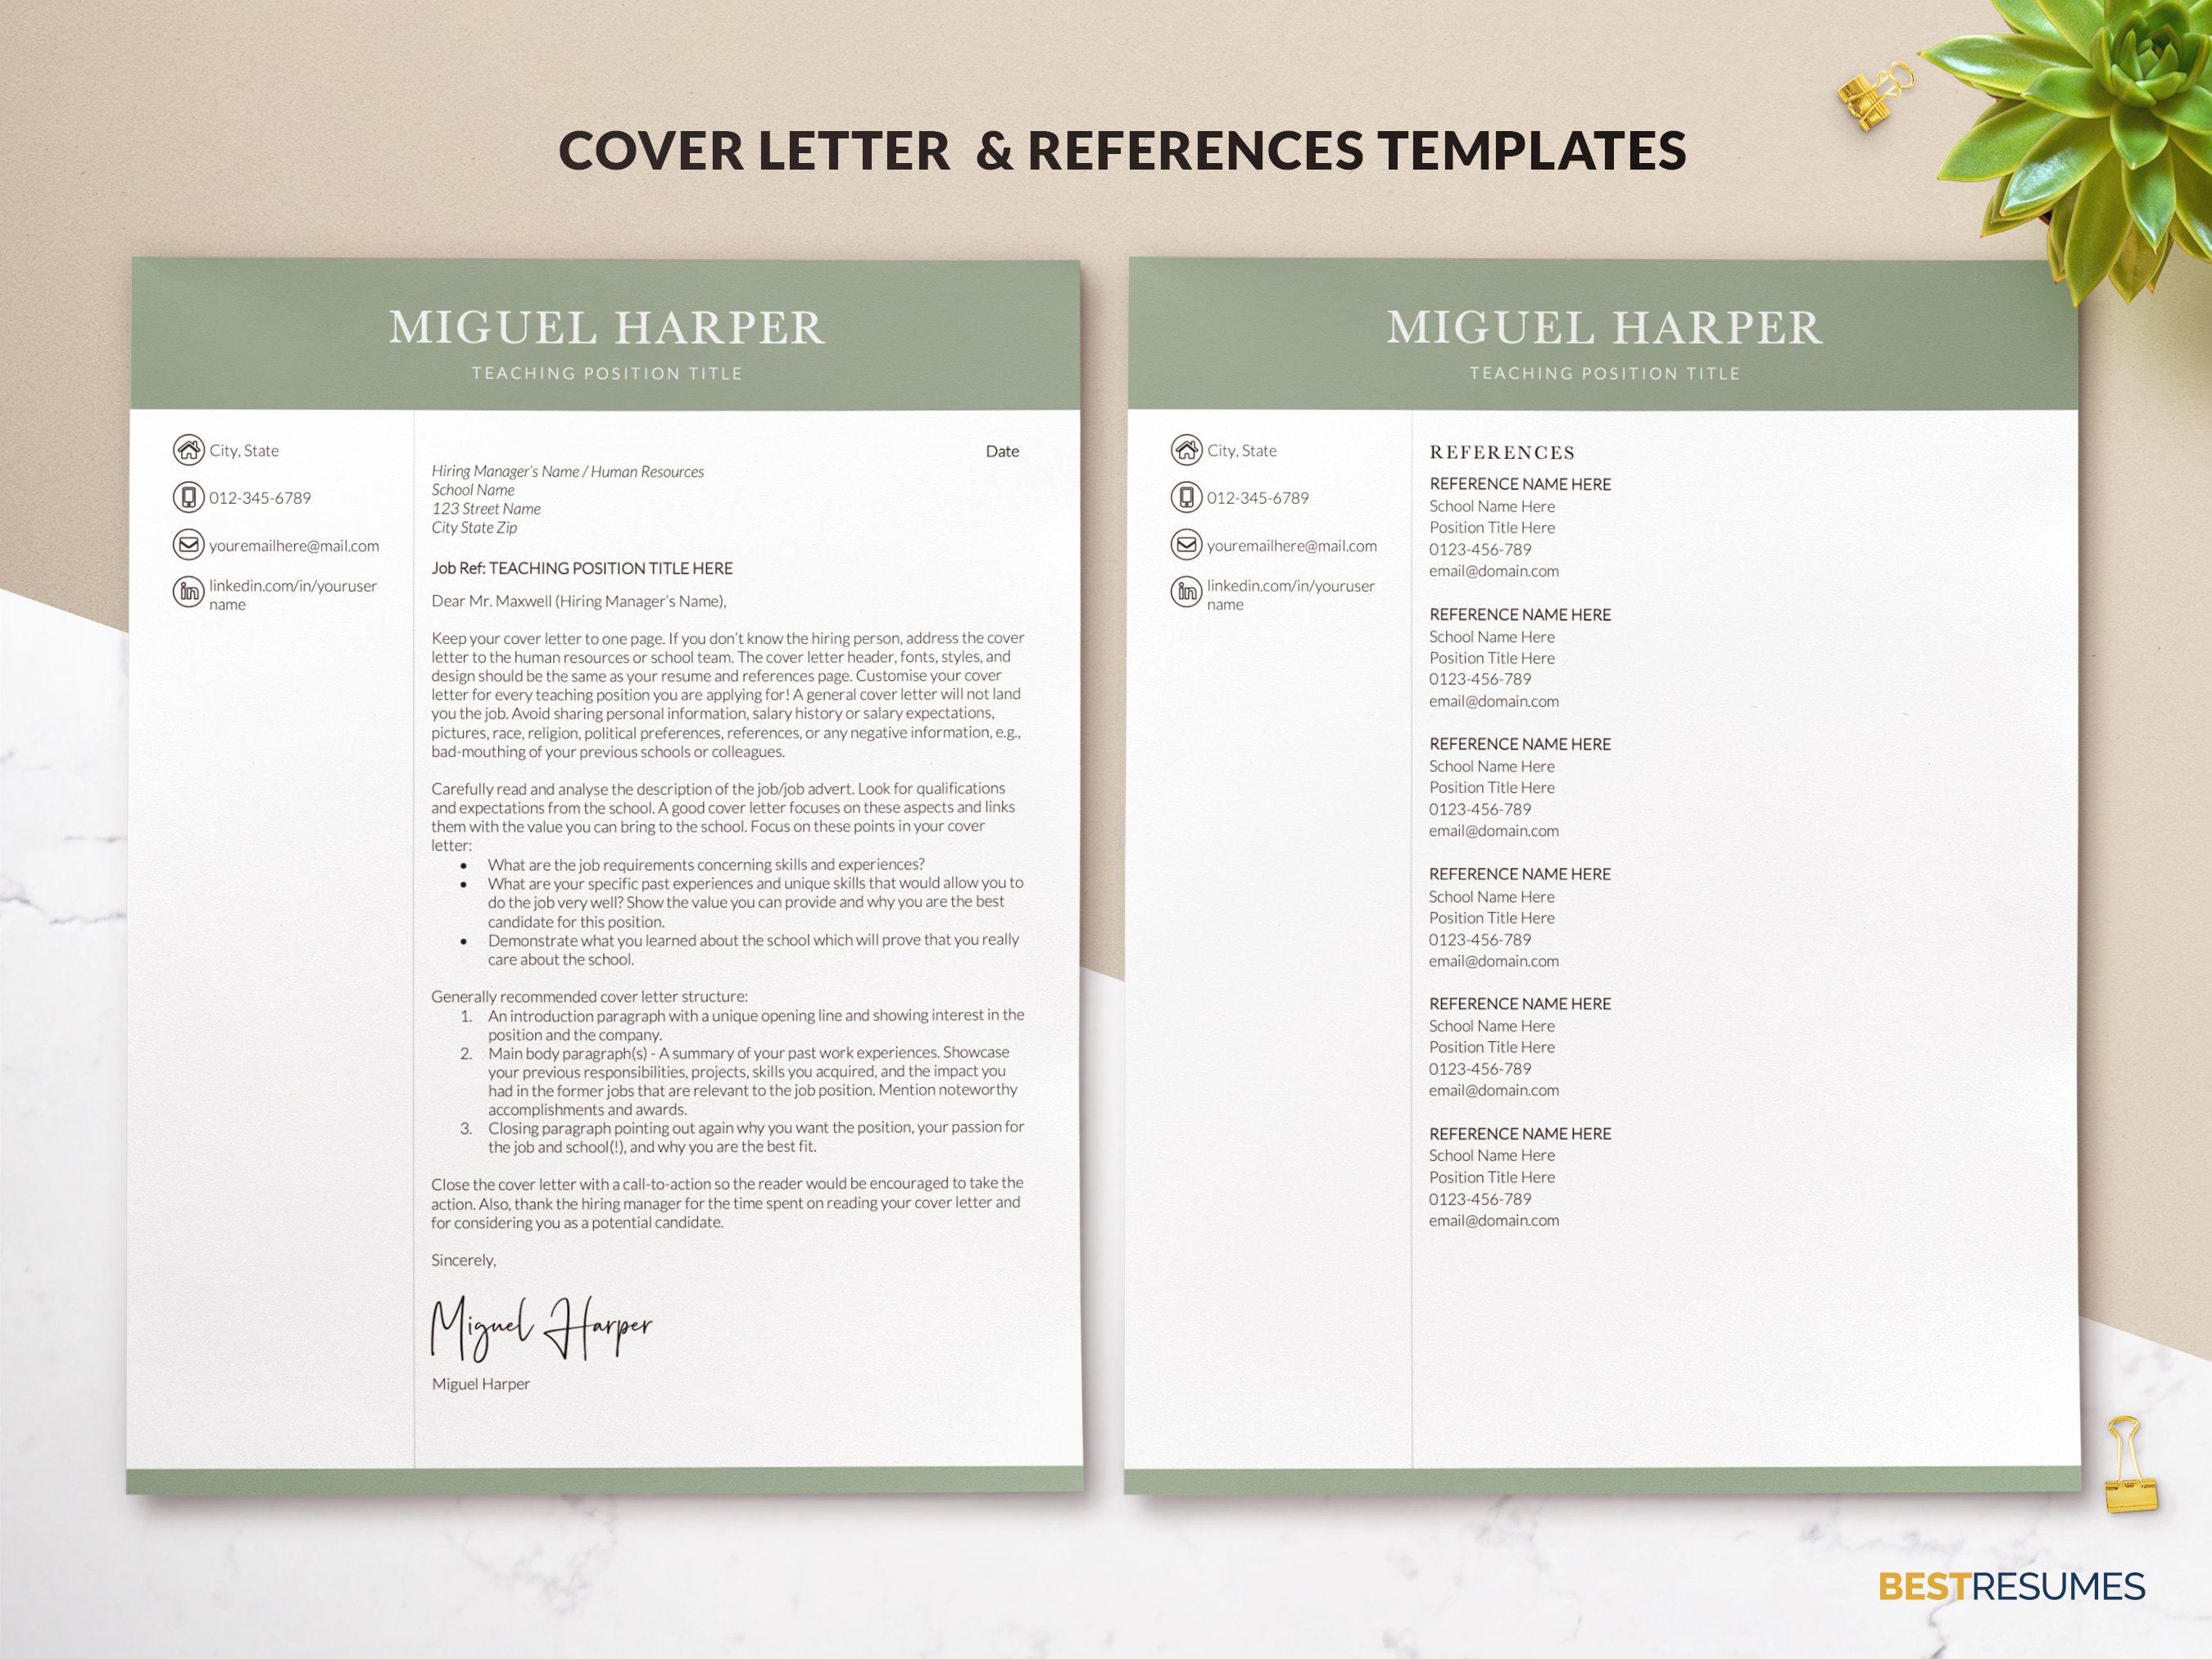 experienced teacher resume template cover letter references pages miguel harper 805